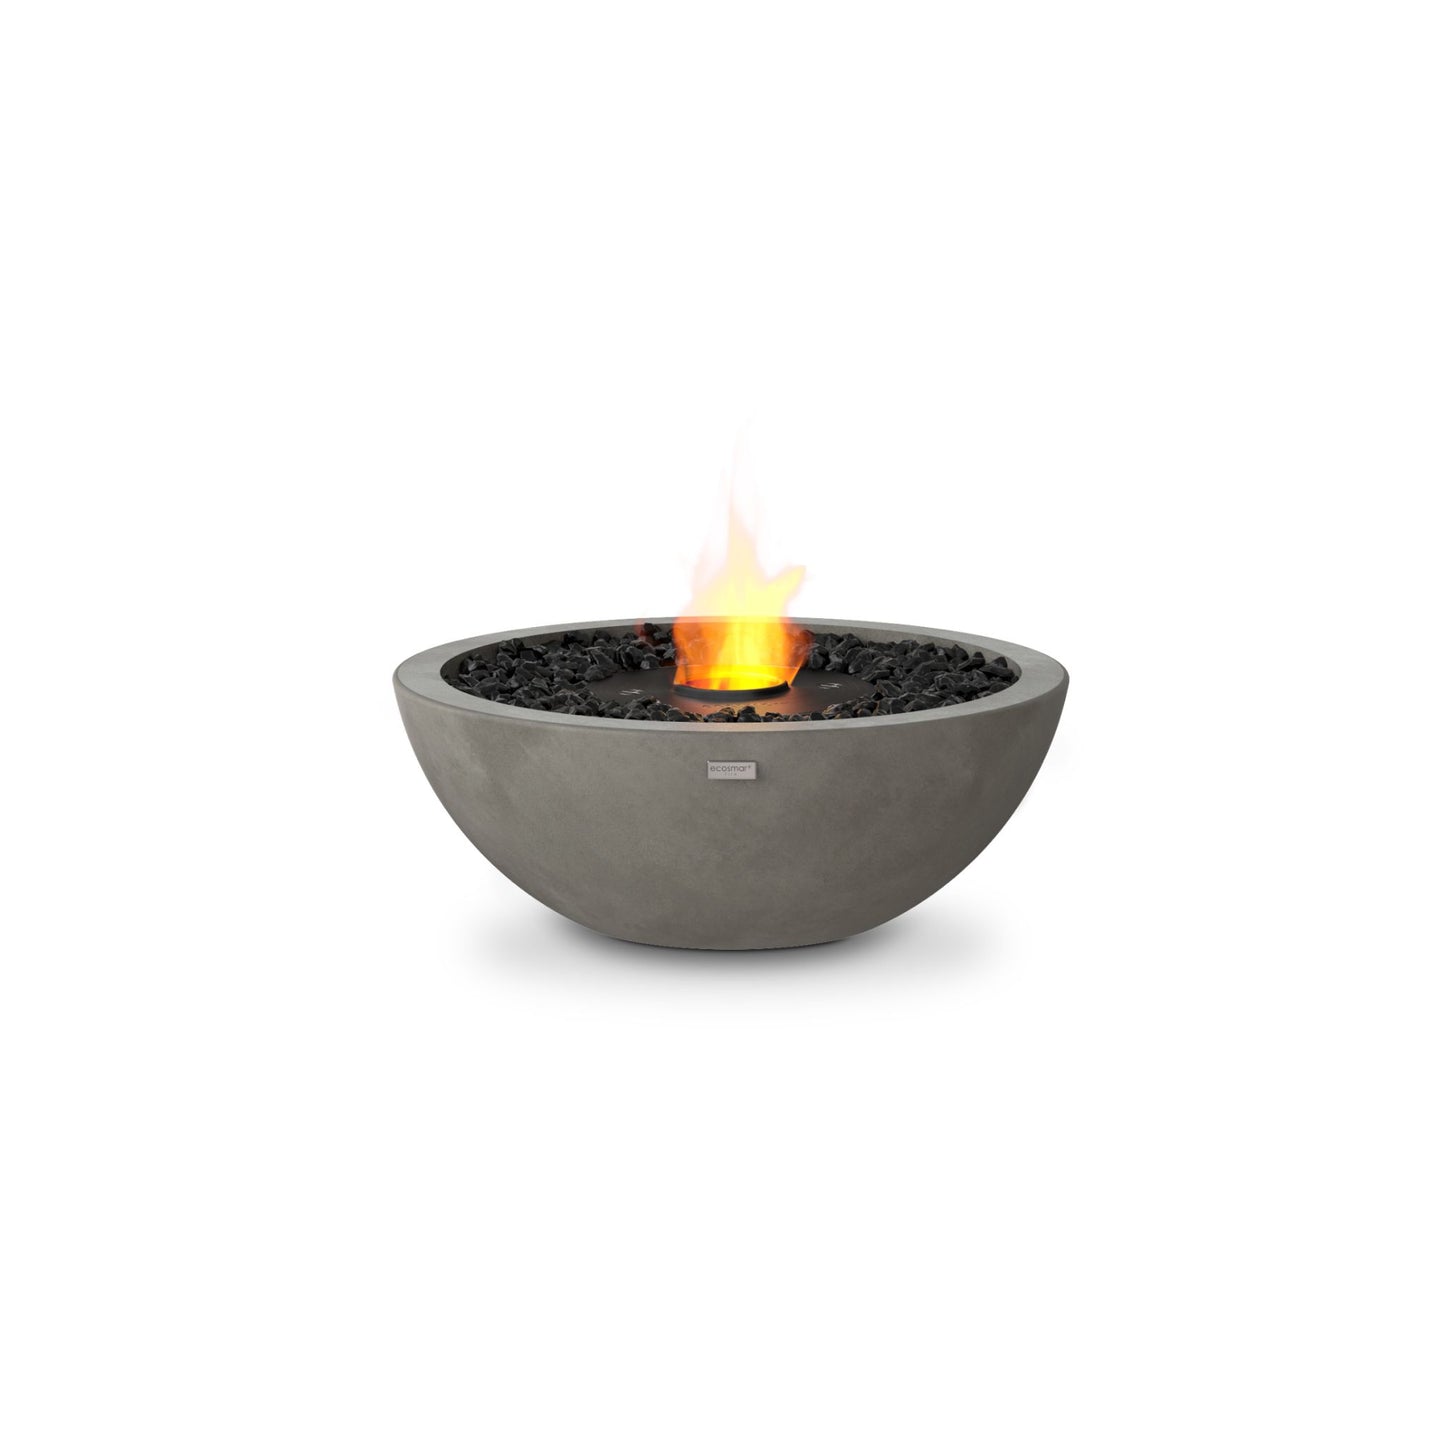 Ecosmart Fire Mix 600 bioethanol fire pit bowl in grey concrete with black steel burner on a white background